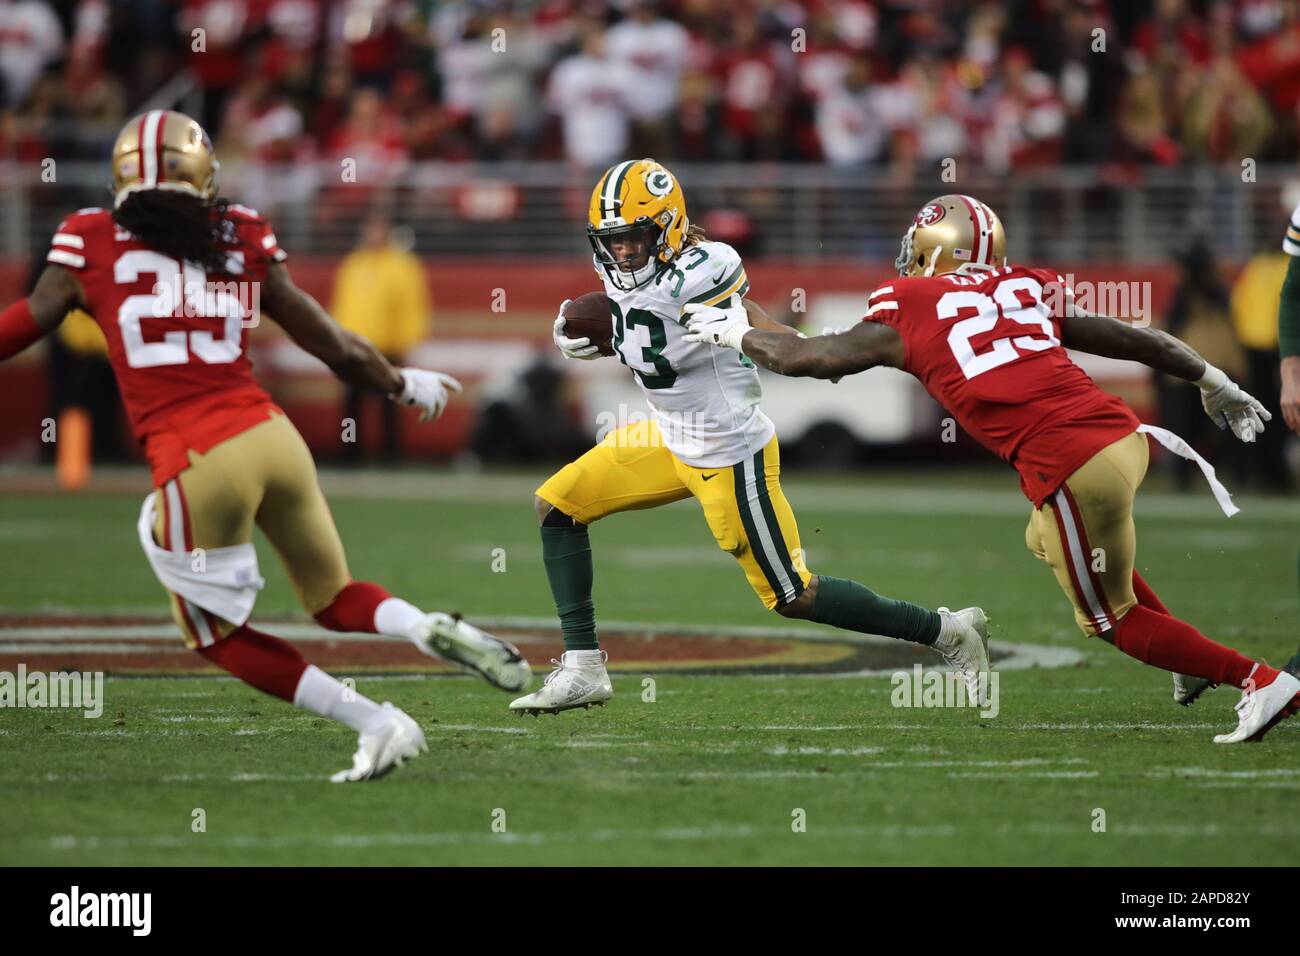 Green Bay Packers running back Aaron Jones (33) runs in front of San  Francisco 49ers cornerback Richard Sherman (25) and strong safety Jaquiski  Tartt (29) during the NFL football NFC Championship game,